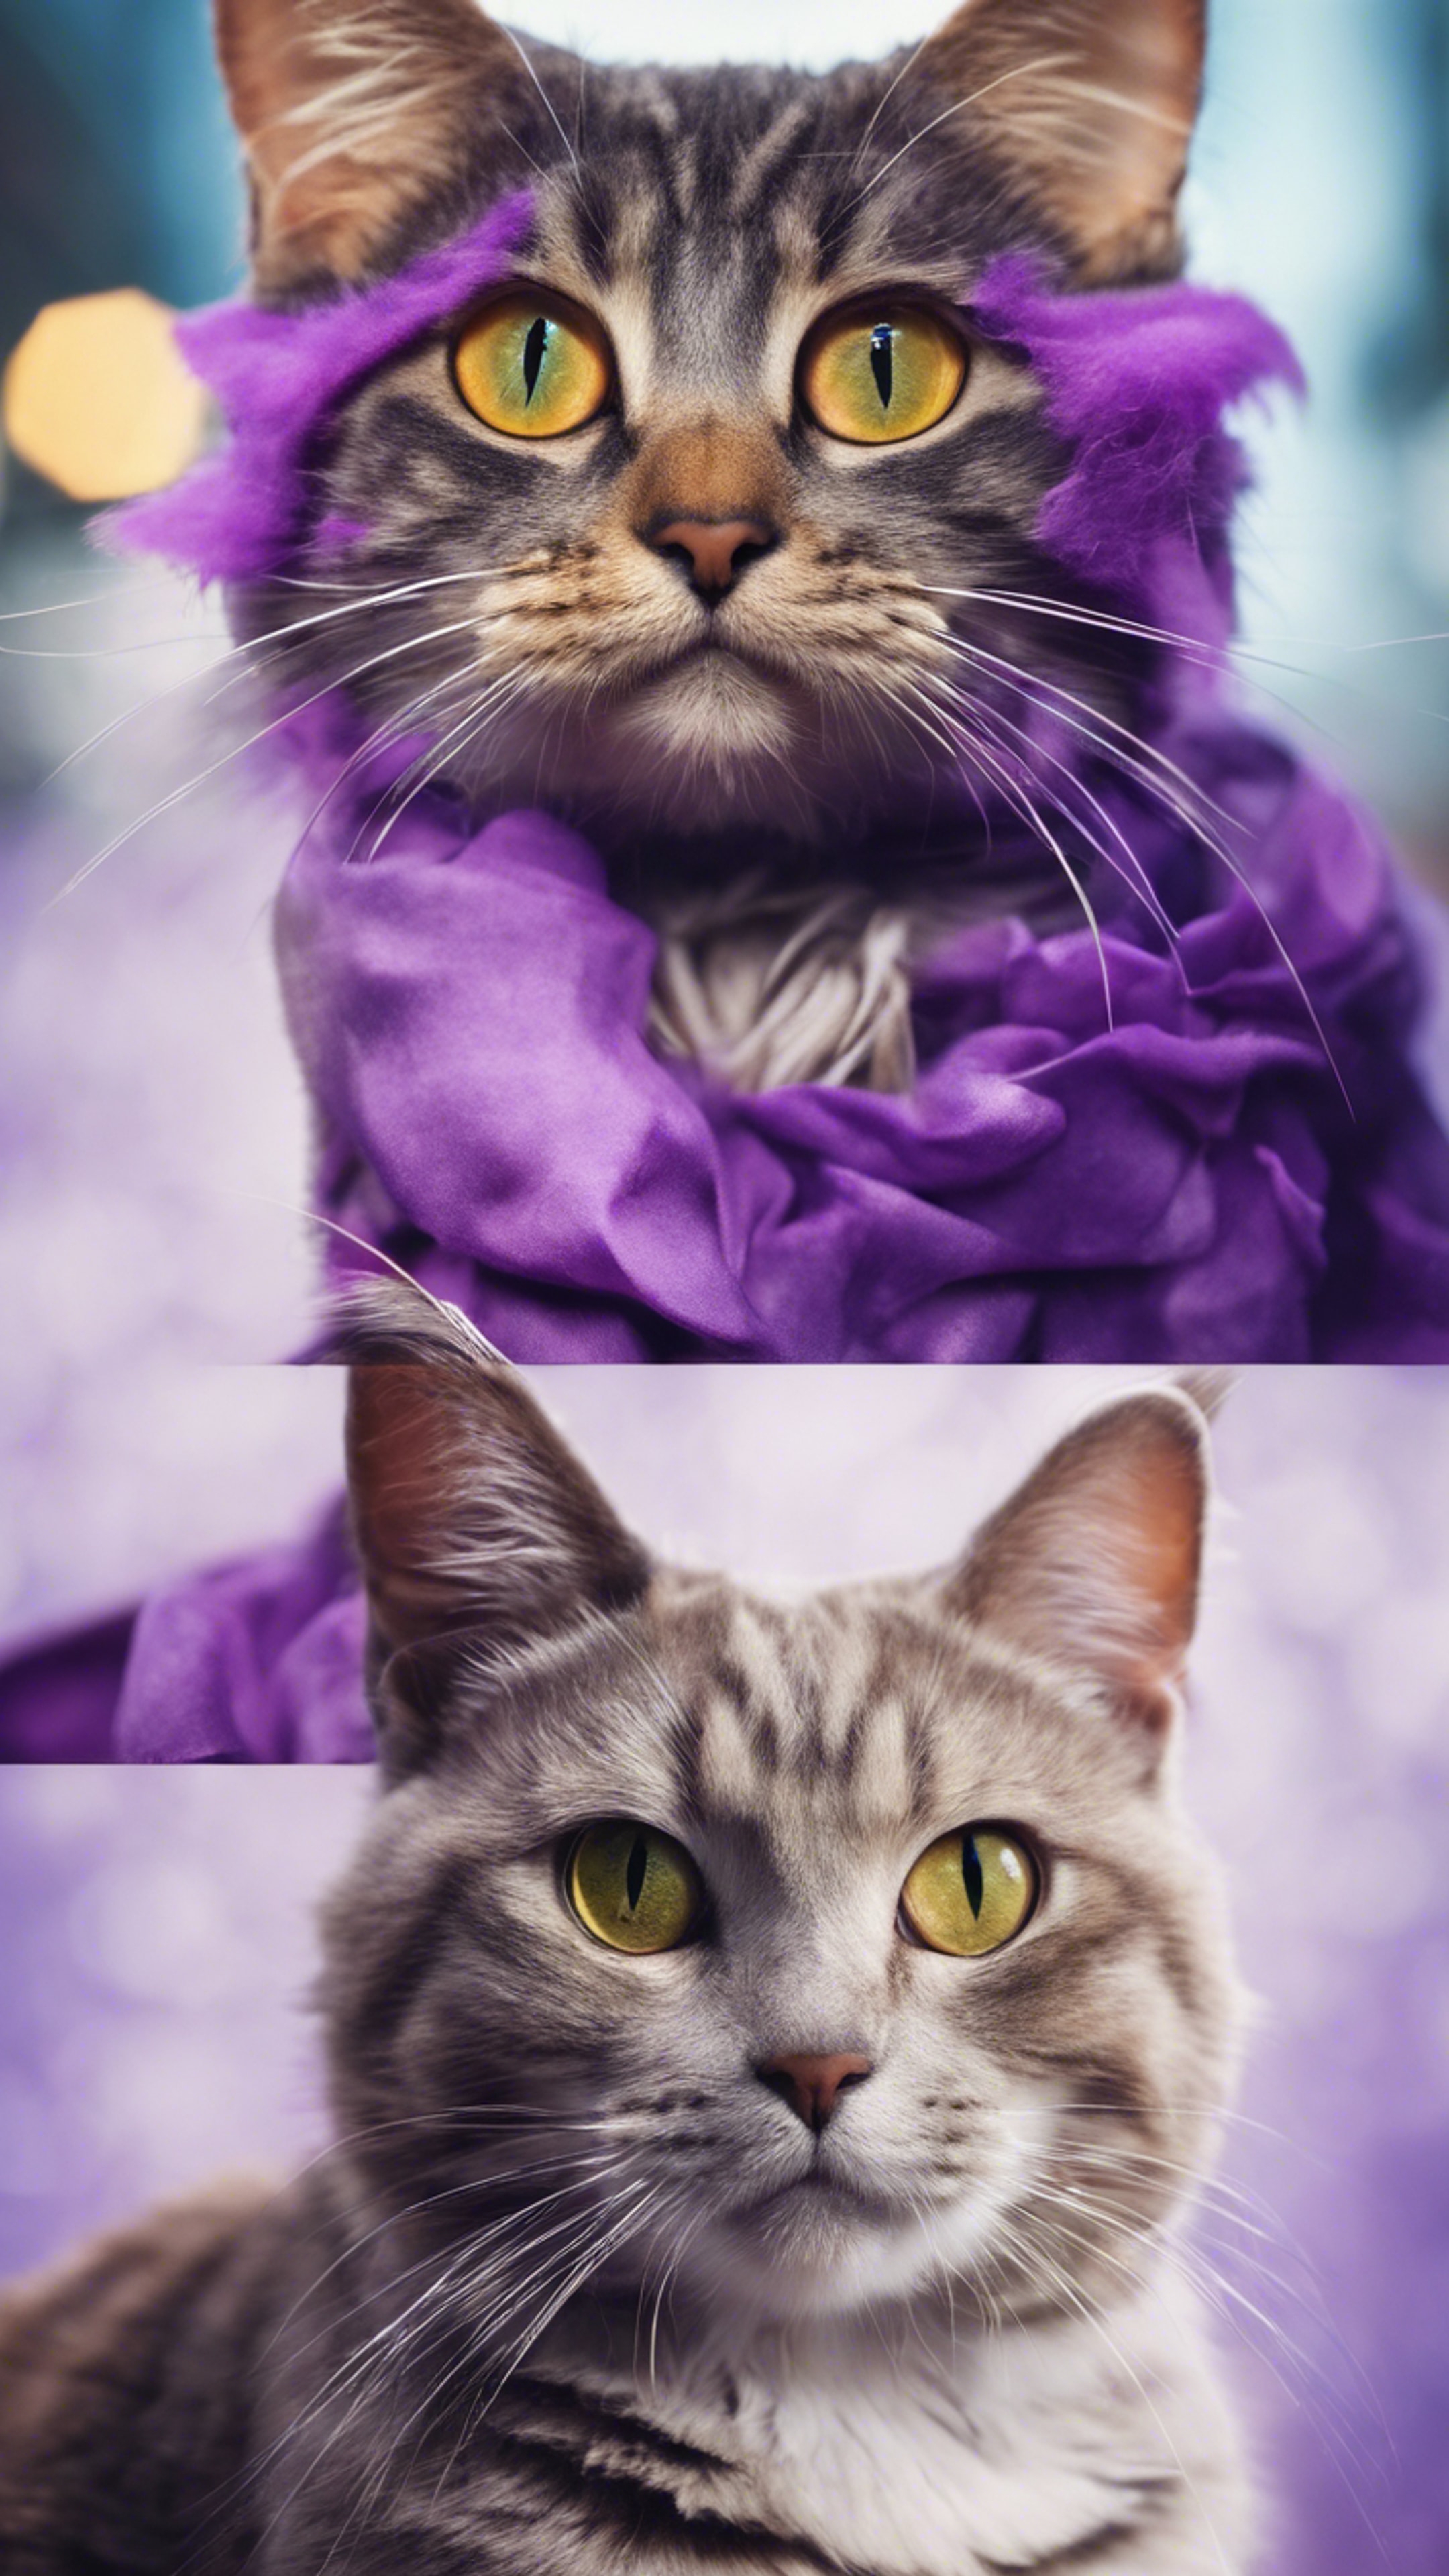 A playful collage showcasing various breeds of cats, all with unusual purple fur. ផ្ទាំង​រូបភាព[3a46628192d3463088be]